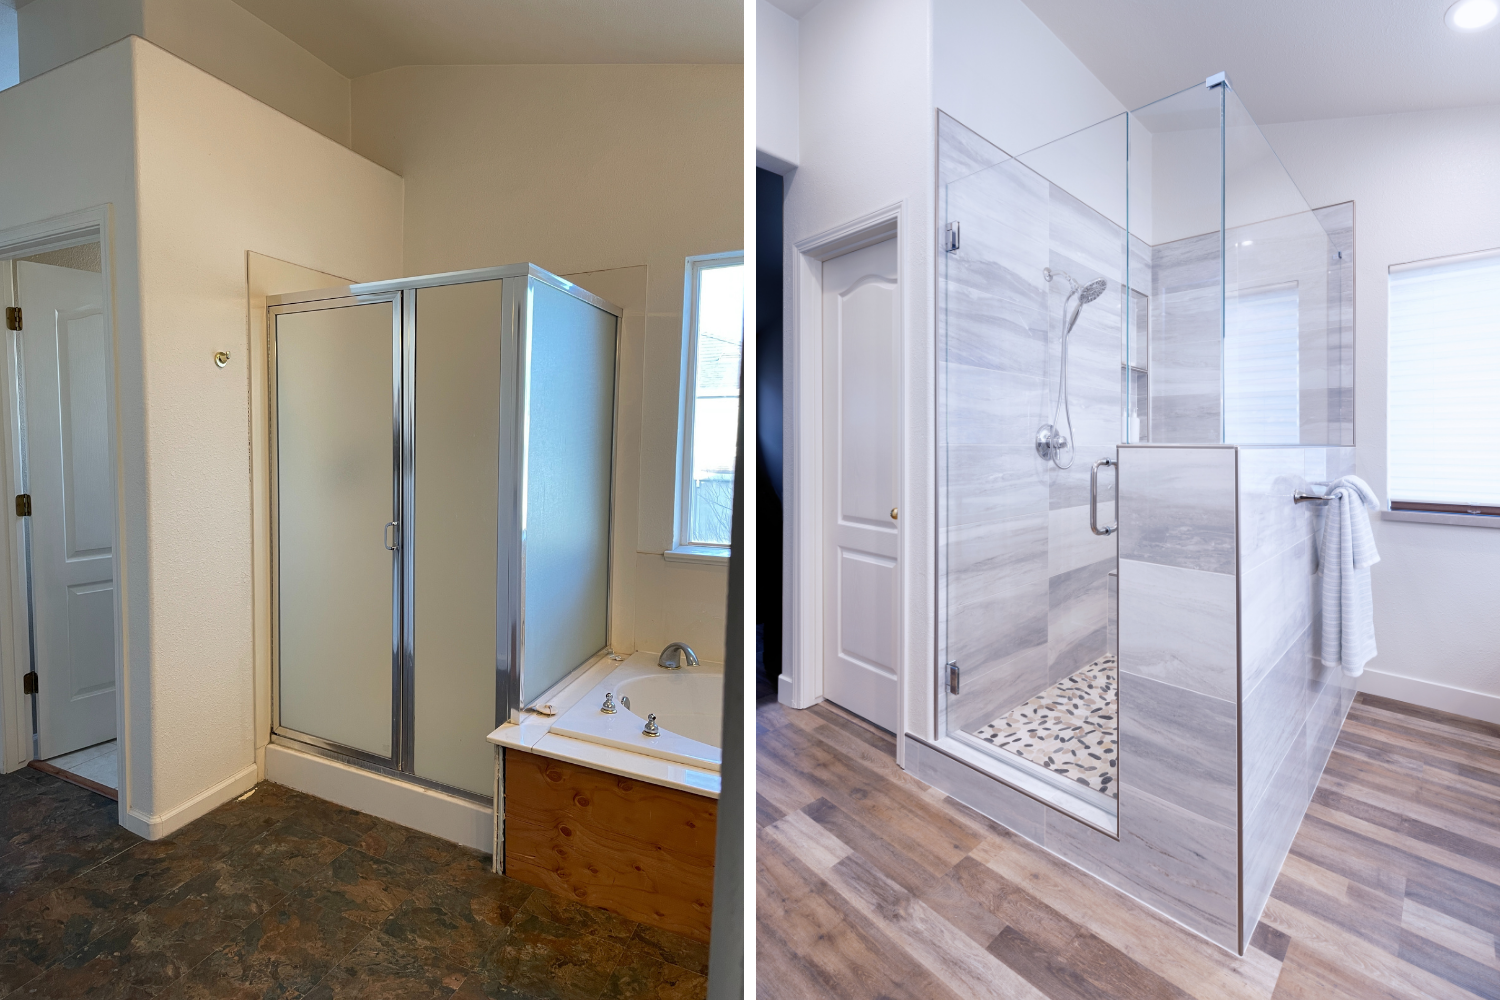 before image of old outdated bathroom shower and large soaking tub and image of new bathroom with spaces luxurious shower and glass shower wall